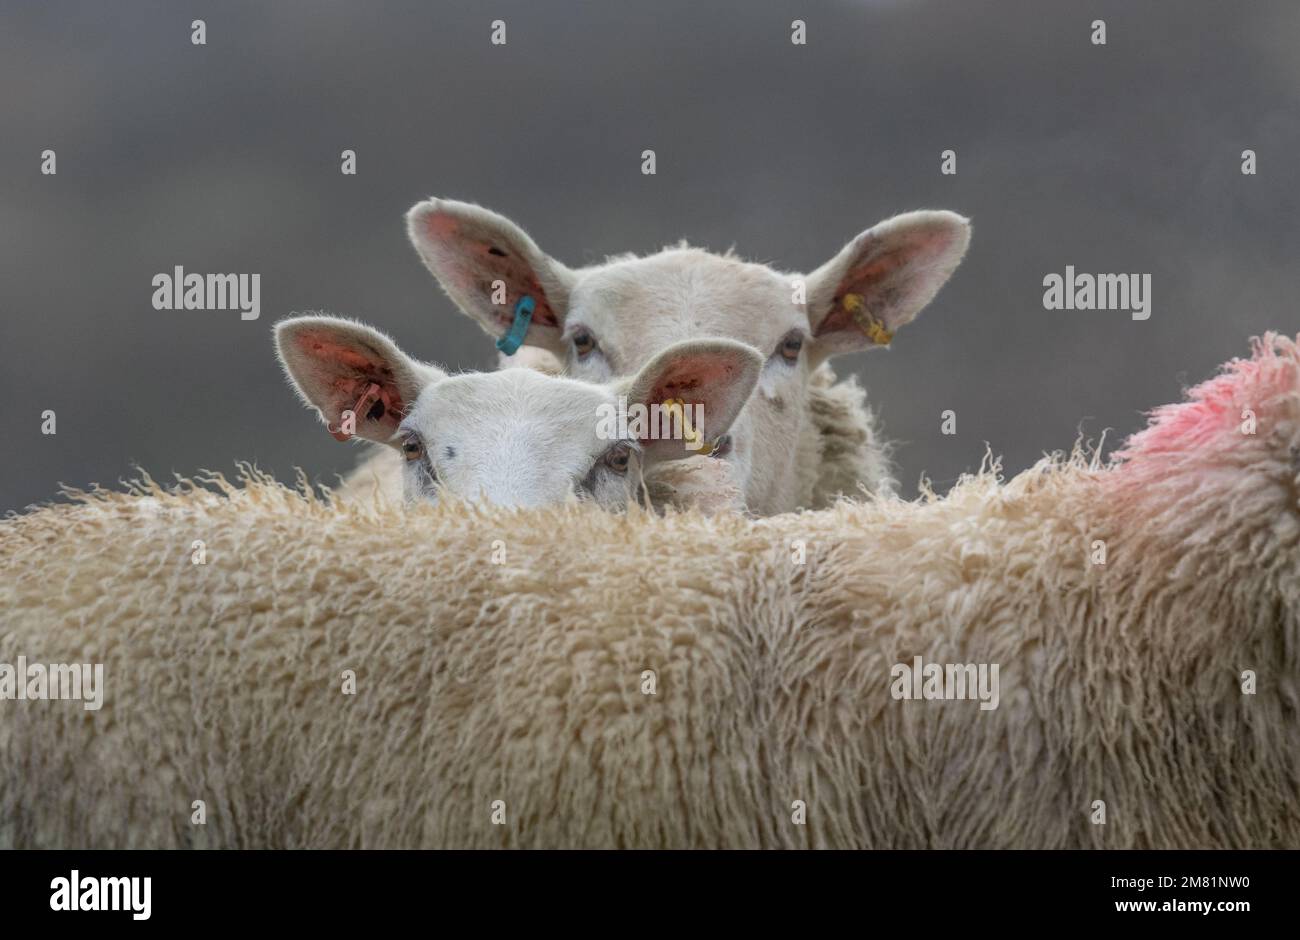 Two sheep with ear tags looking over the back of another sheep. Stock Photo